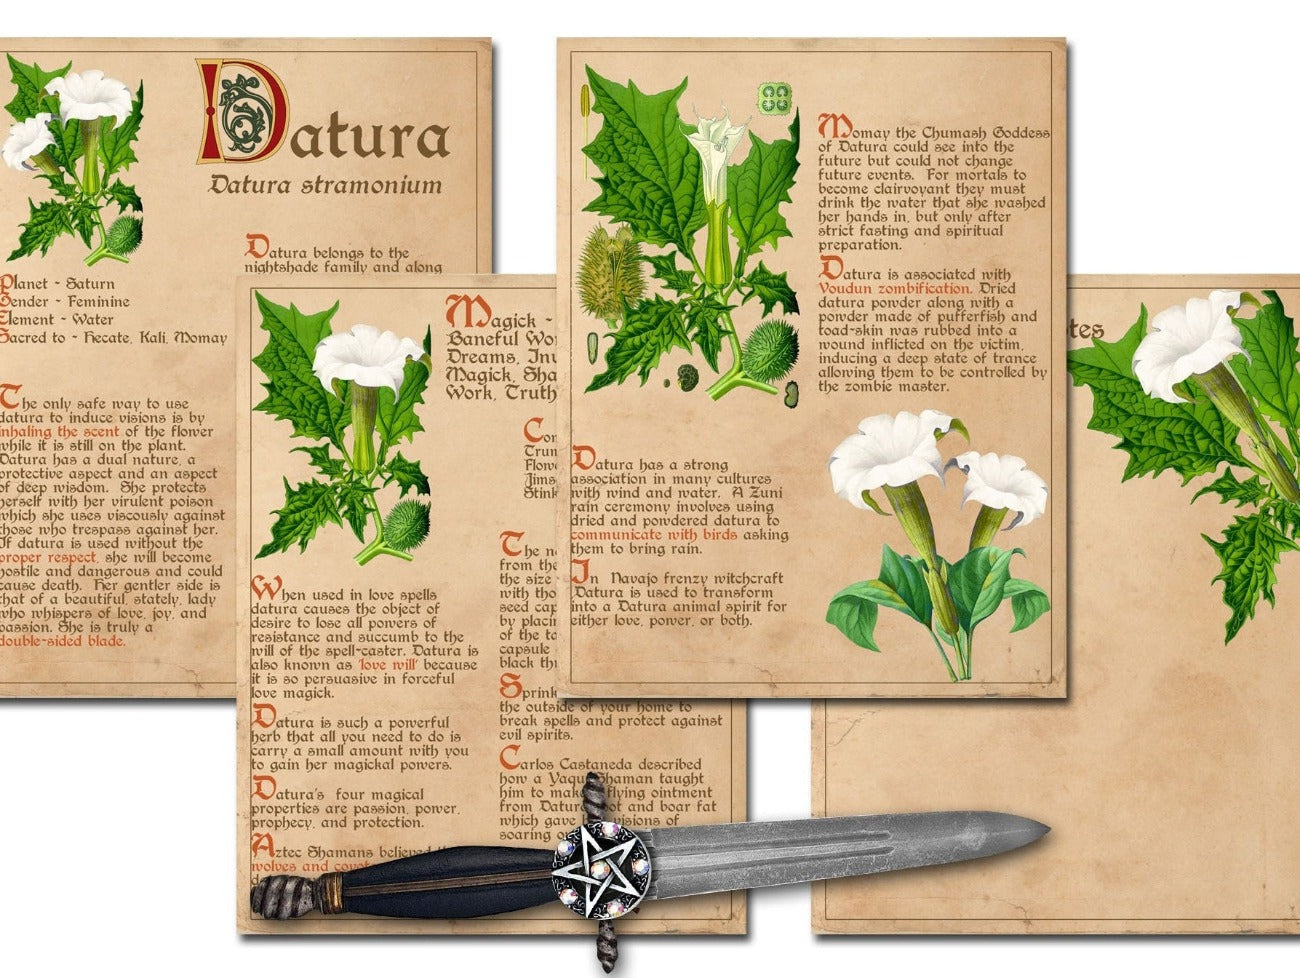 DATURA BANEFUL HERB 4 Pages, Grimoire Printable, Witchcraft Poisonous Plants & Herbs, Wicca Pagan Green Witch, Herbal Apothecary Magic - Morgana Magick Spell